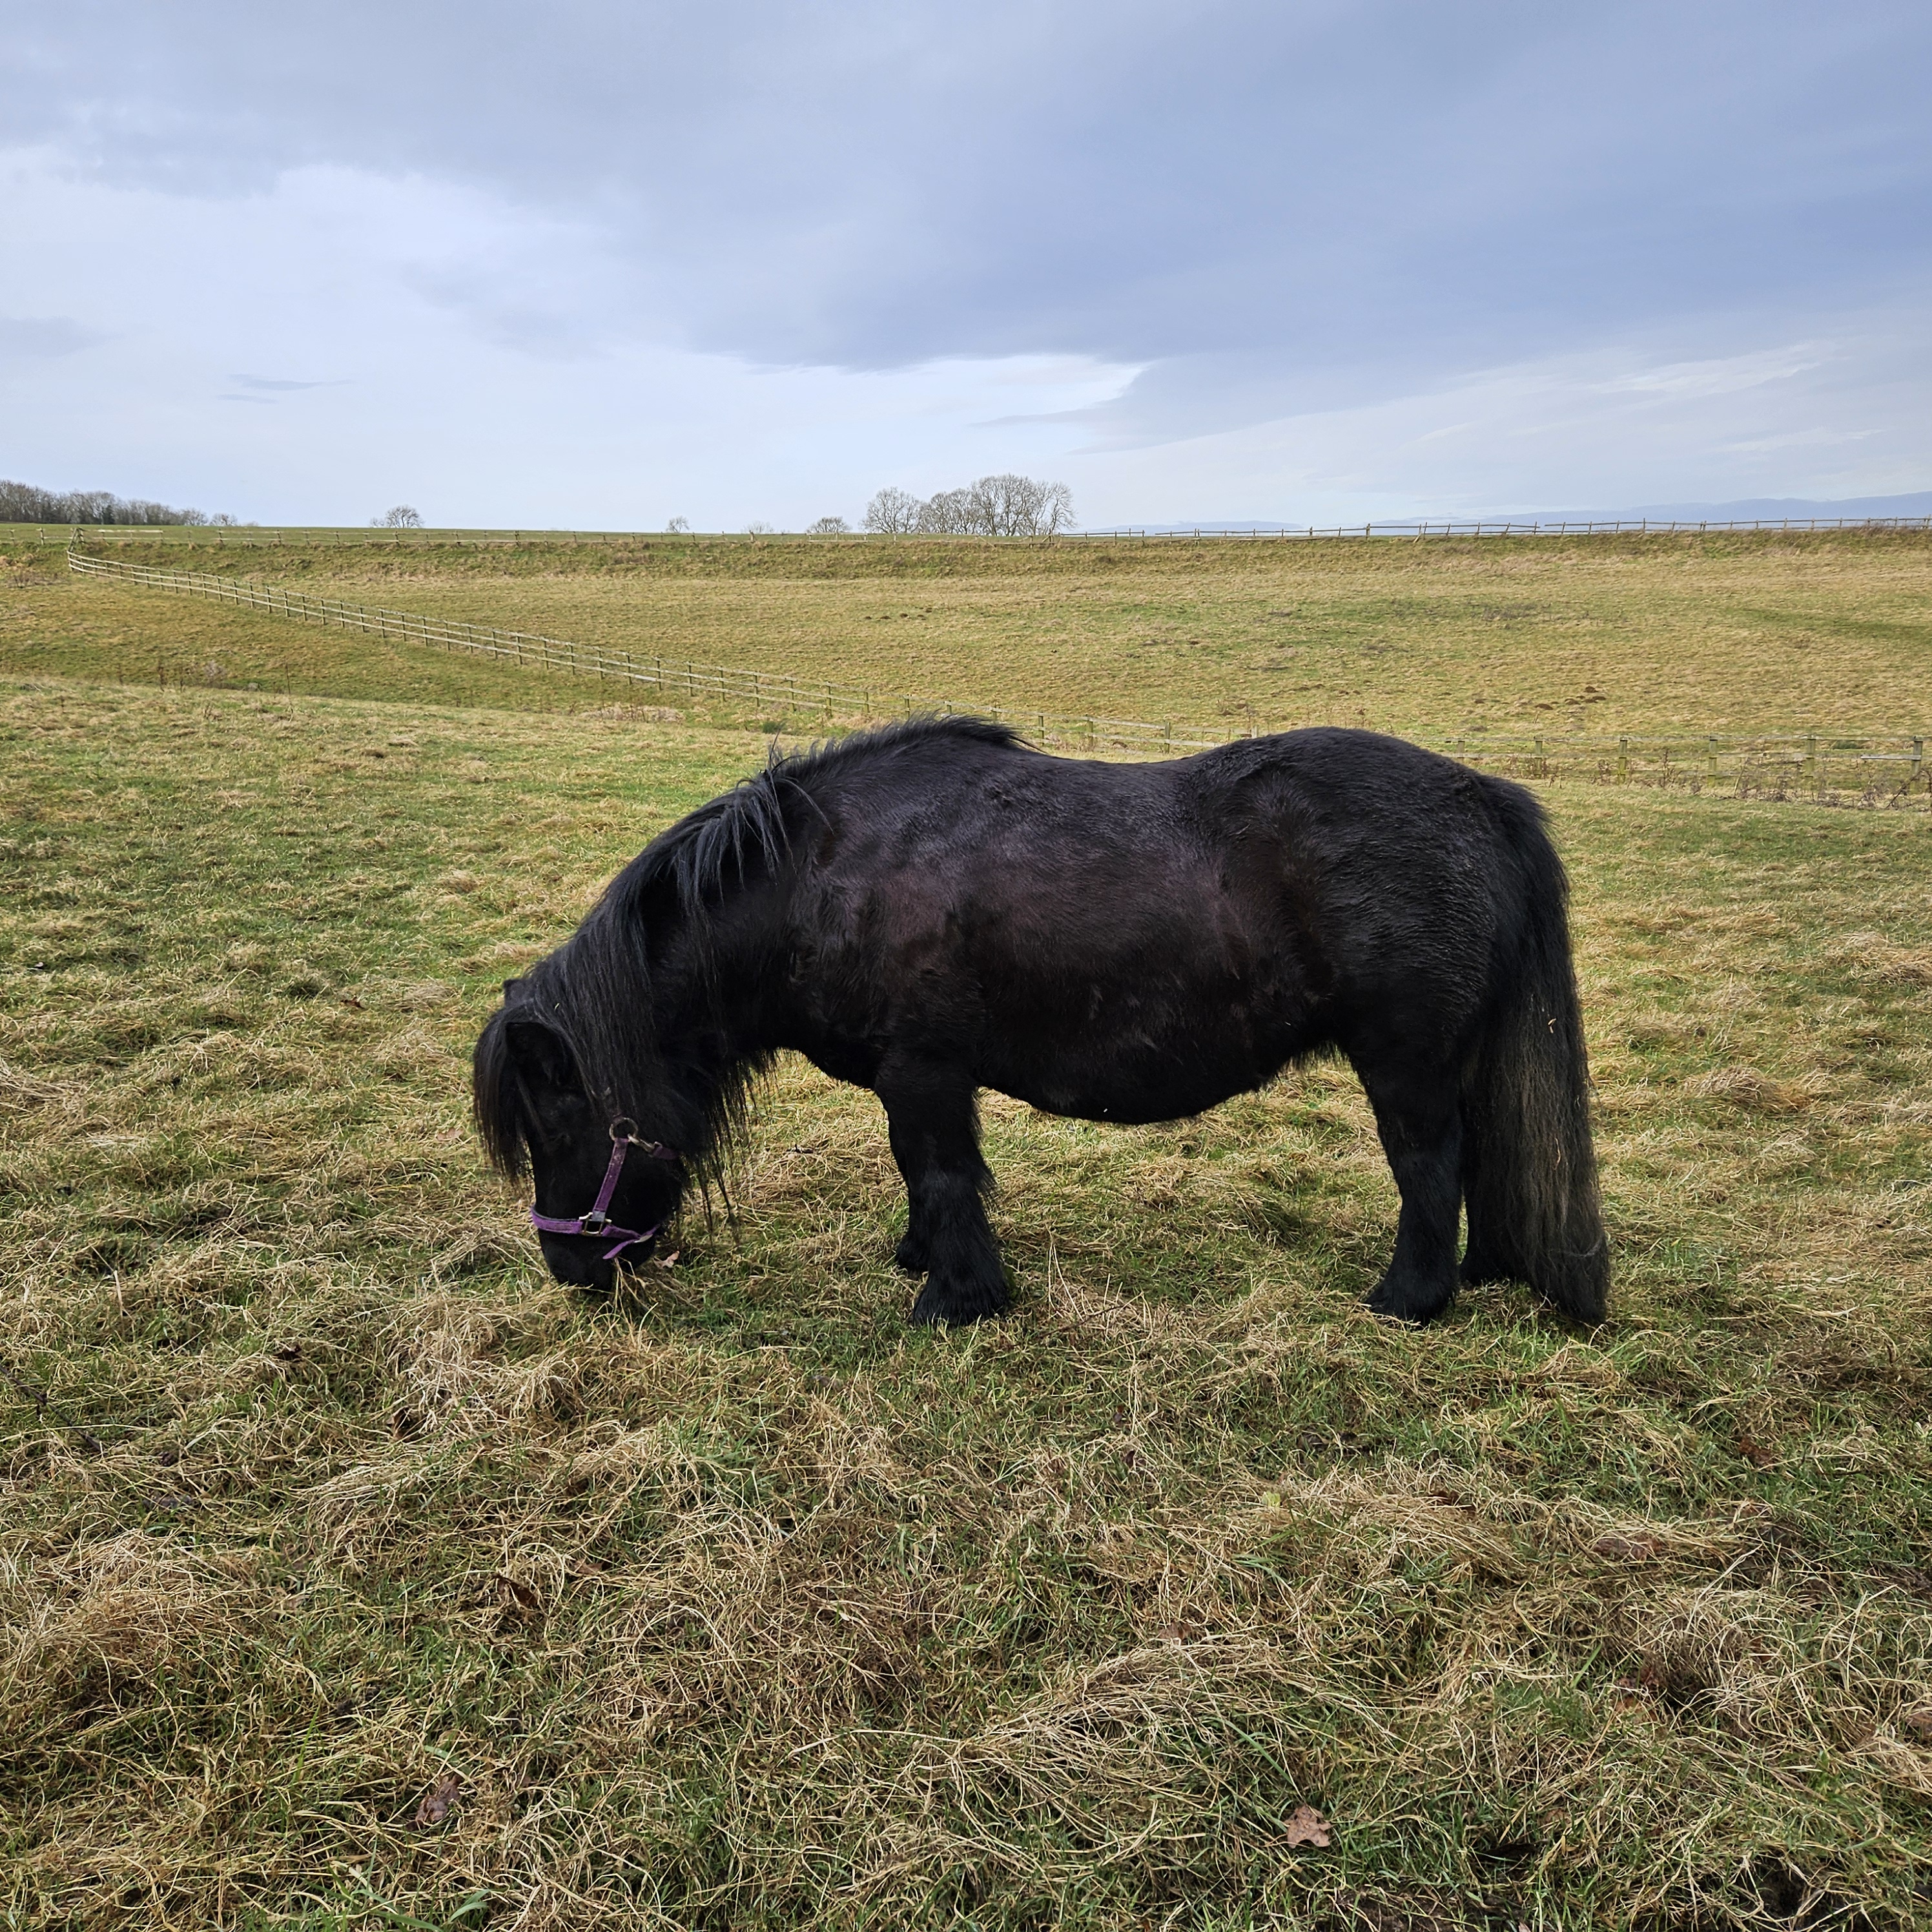 The Not-So-Secret Diary of Diva the Shetland Pony - New Year, New Routines